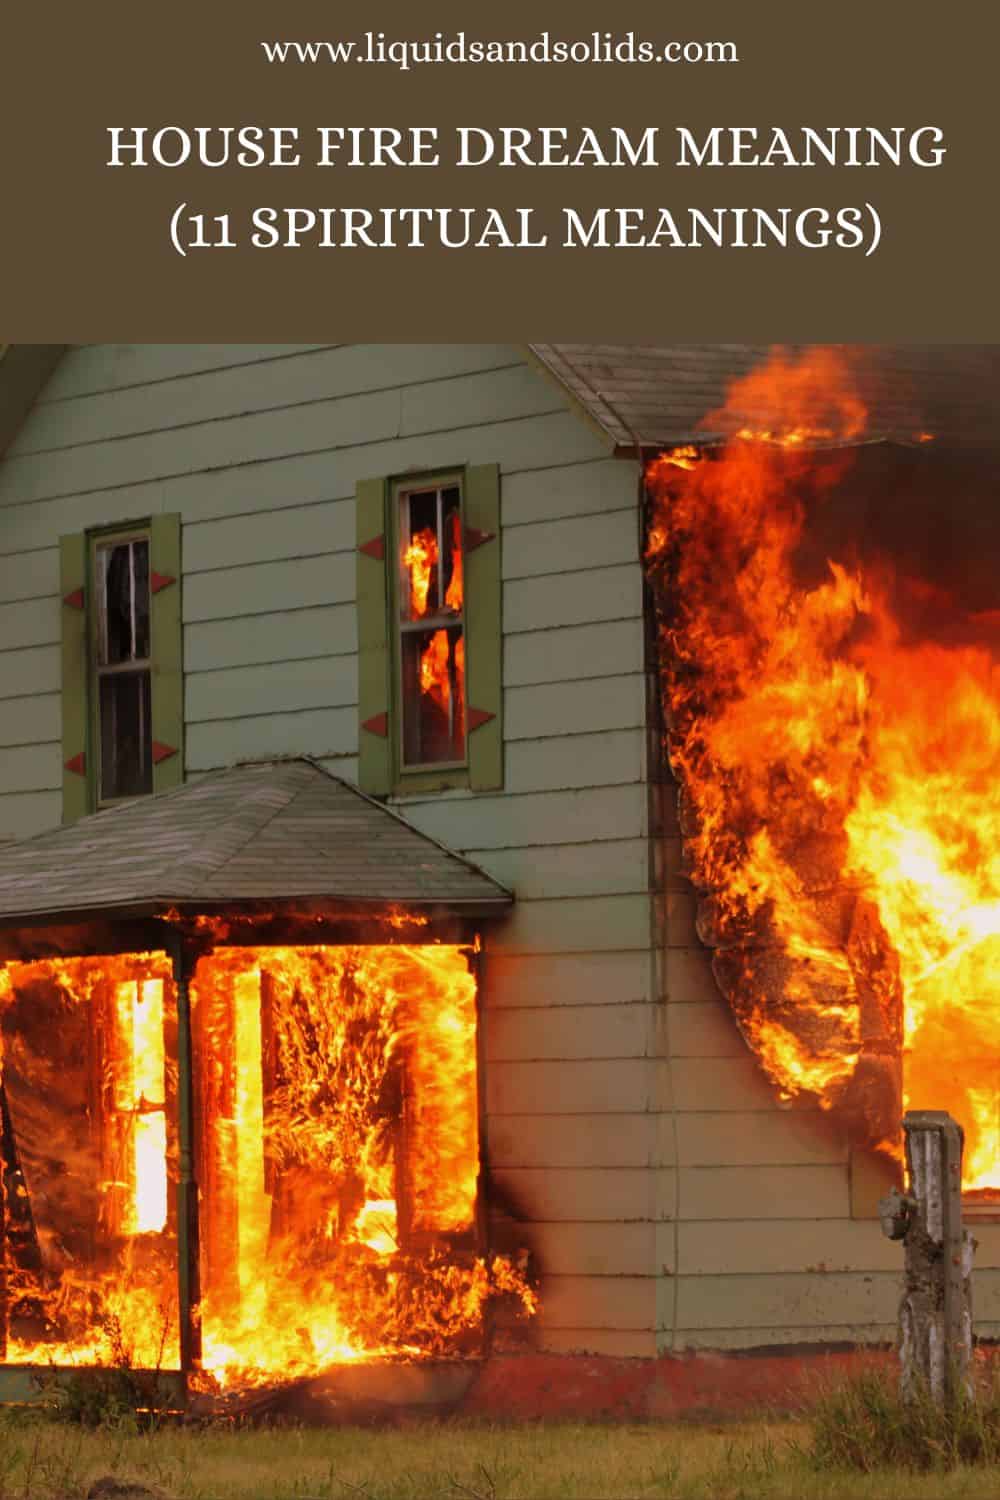 House Fire Dream Meaning (11 Spiritual Meanings)